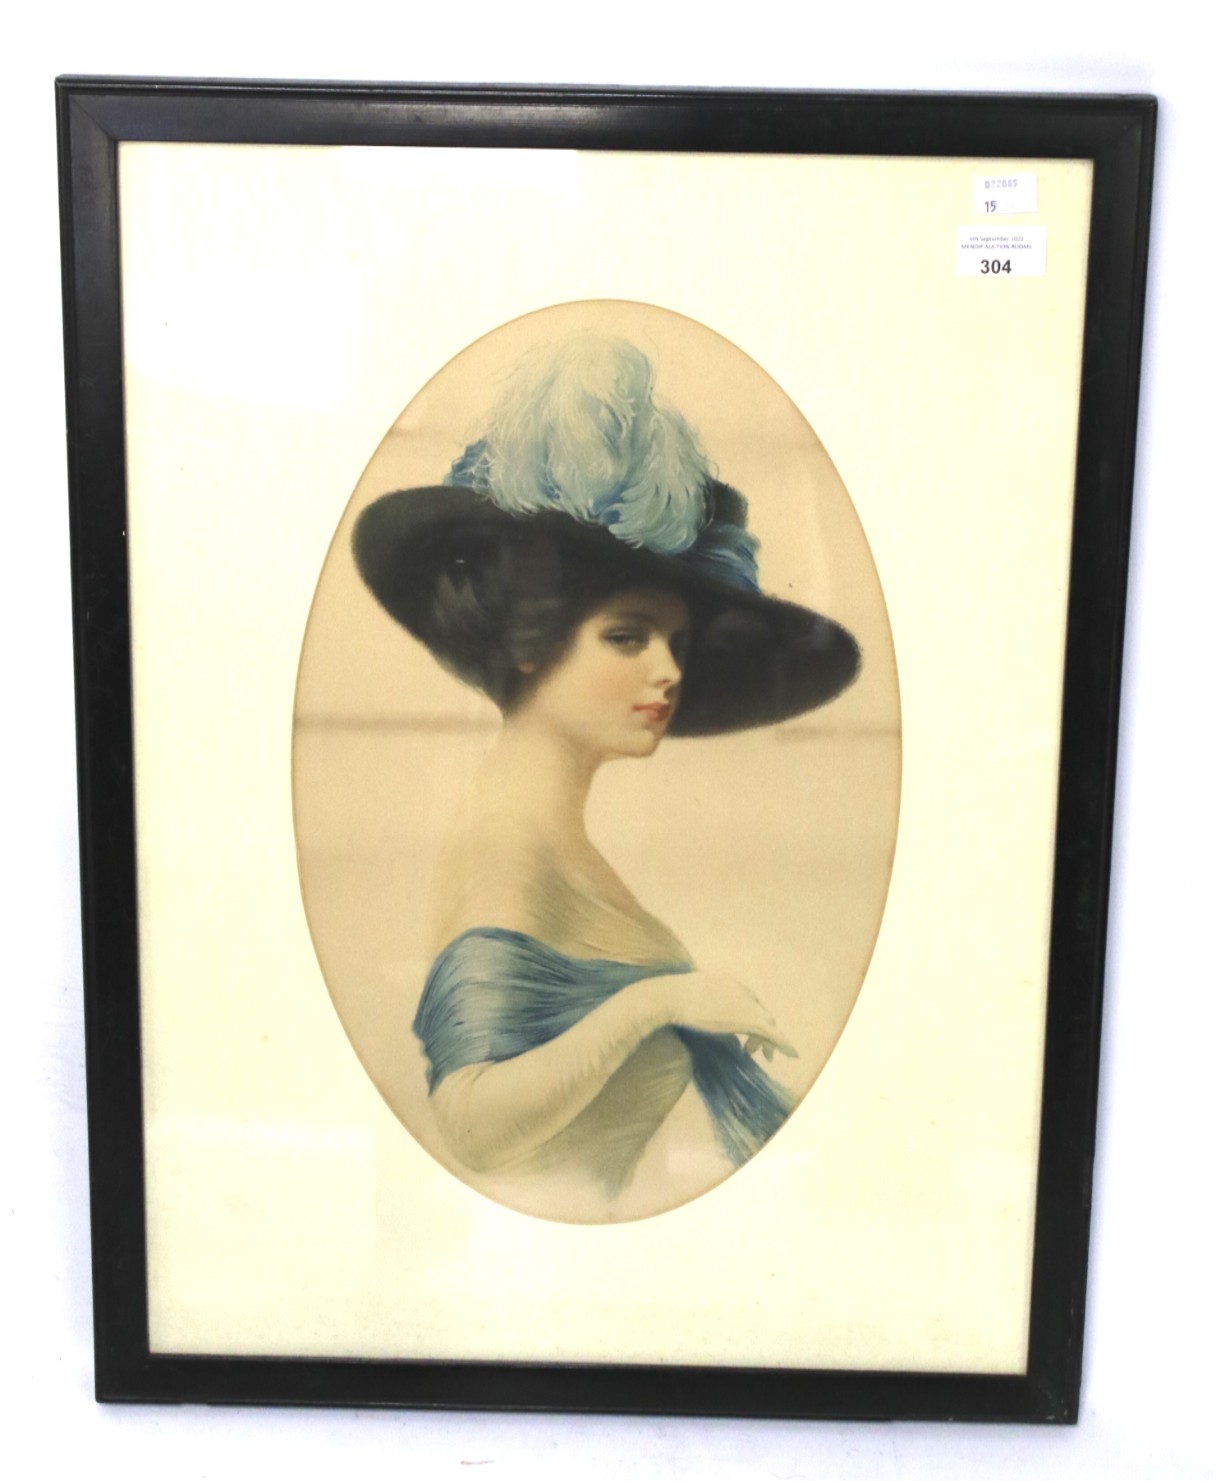 A framed print of an Edwardian lady wearing a black wide-brimmed blue feathered hat.